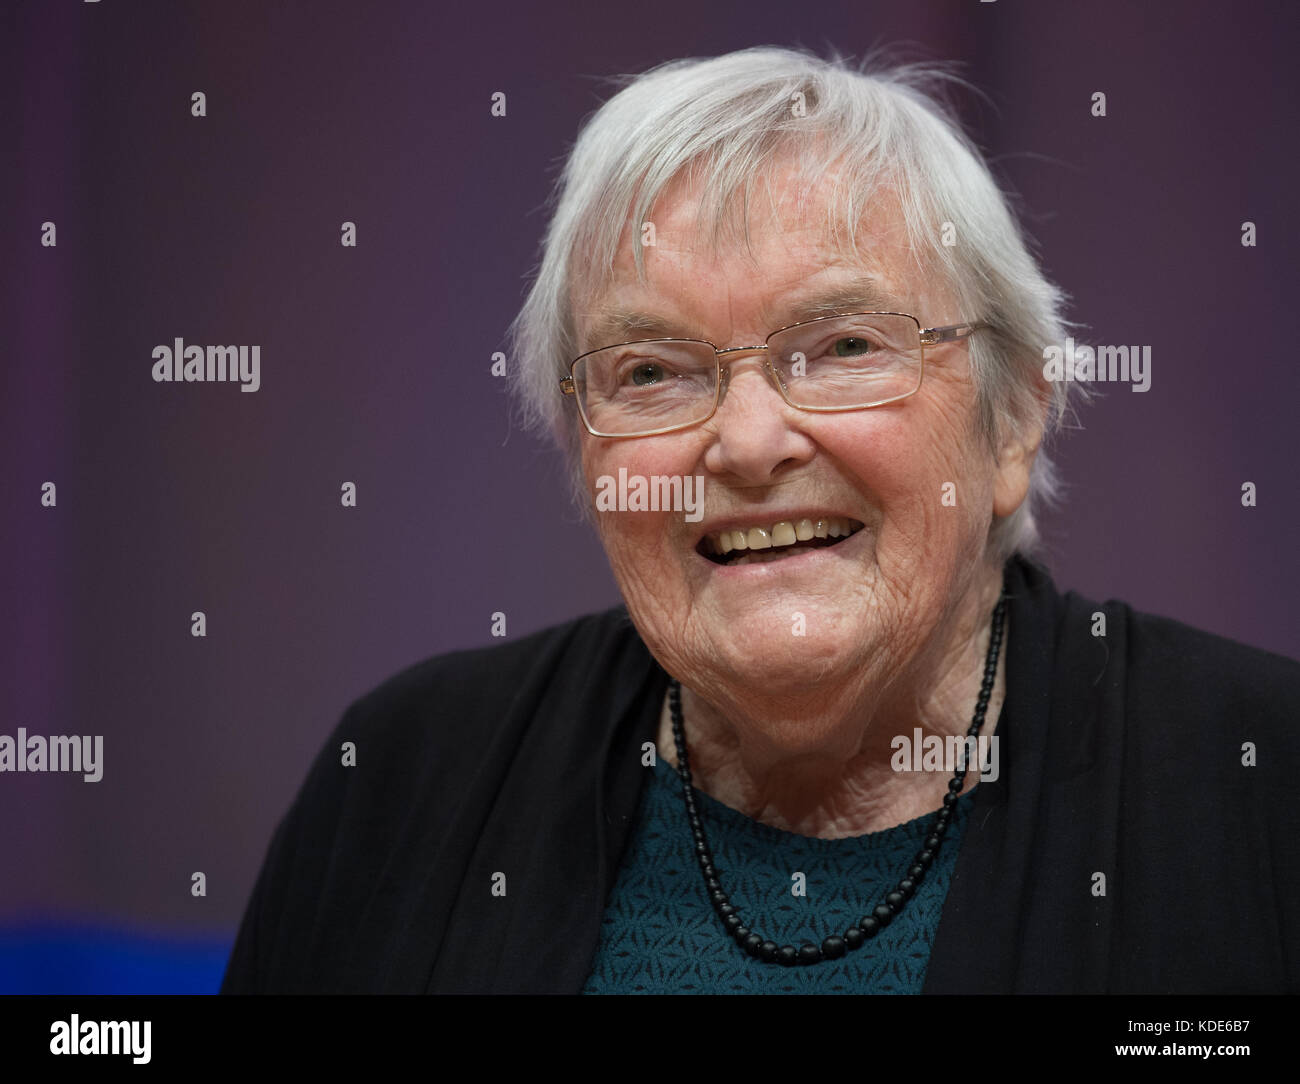 Author Gudrun Pausewang smiles during the German Youth Literature Award 2017 at the Buchmesse in Frankfurt/Main, Germany, 13 October 2017. The 89-year-old won the Special Price for her complete work. Photo: Arne Dedert/dpa Stock Photo